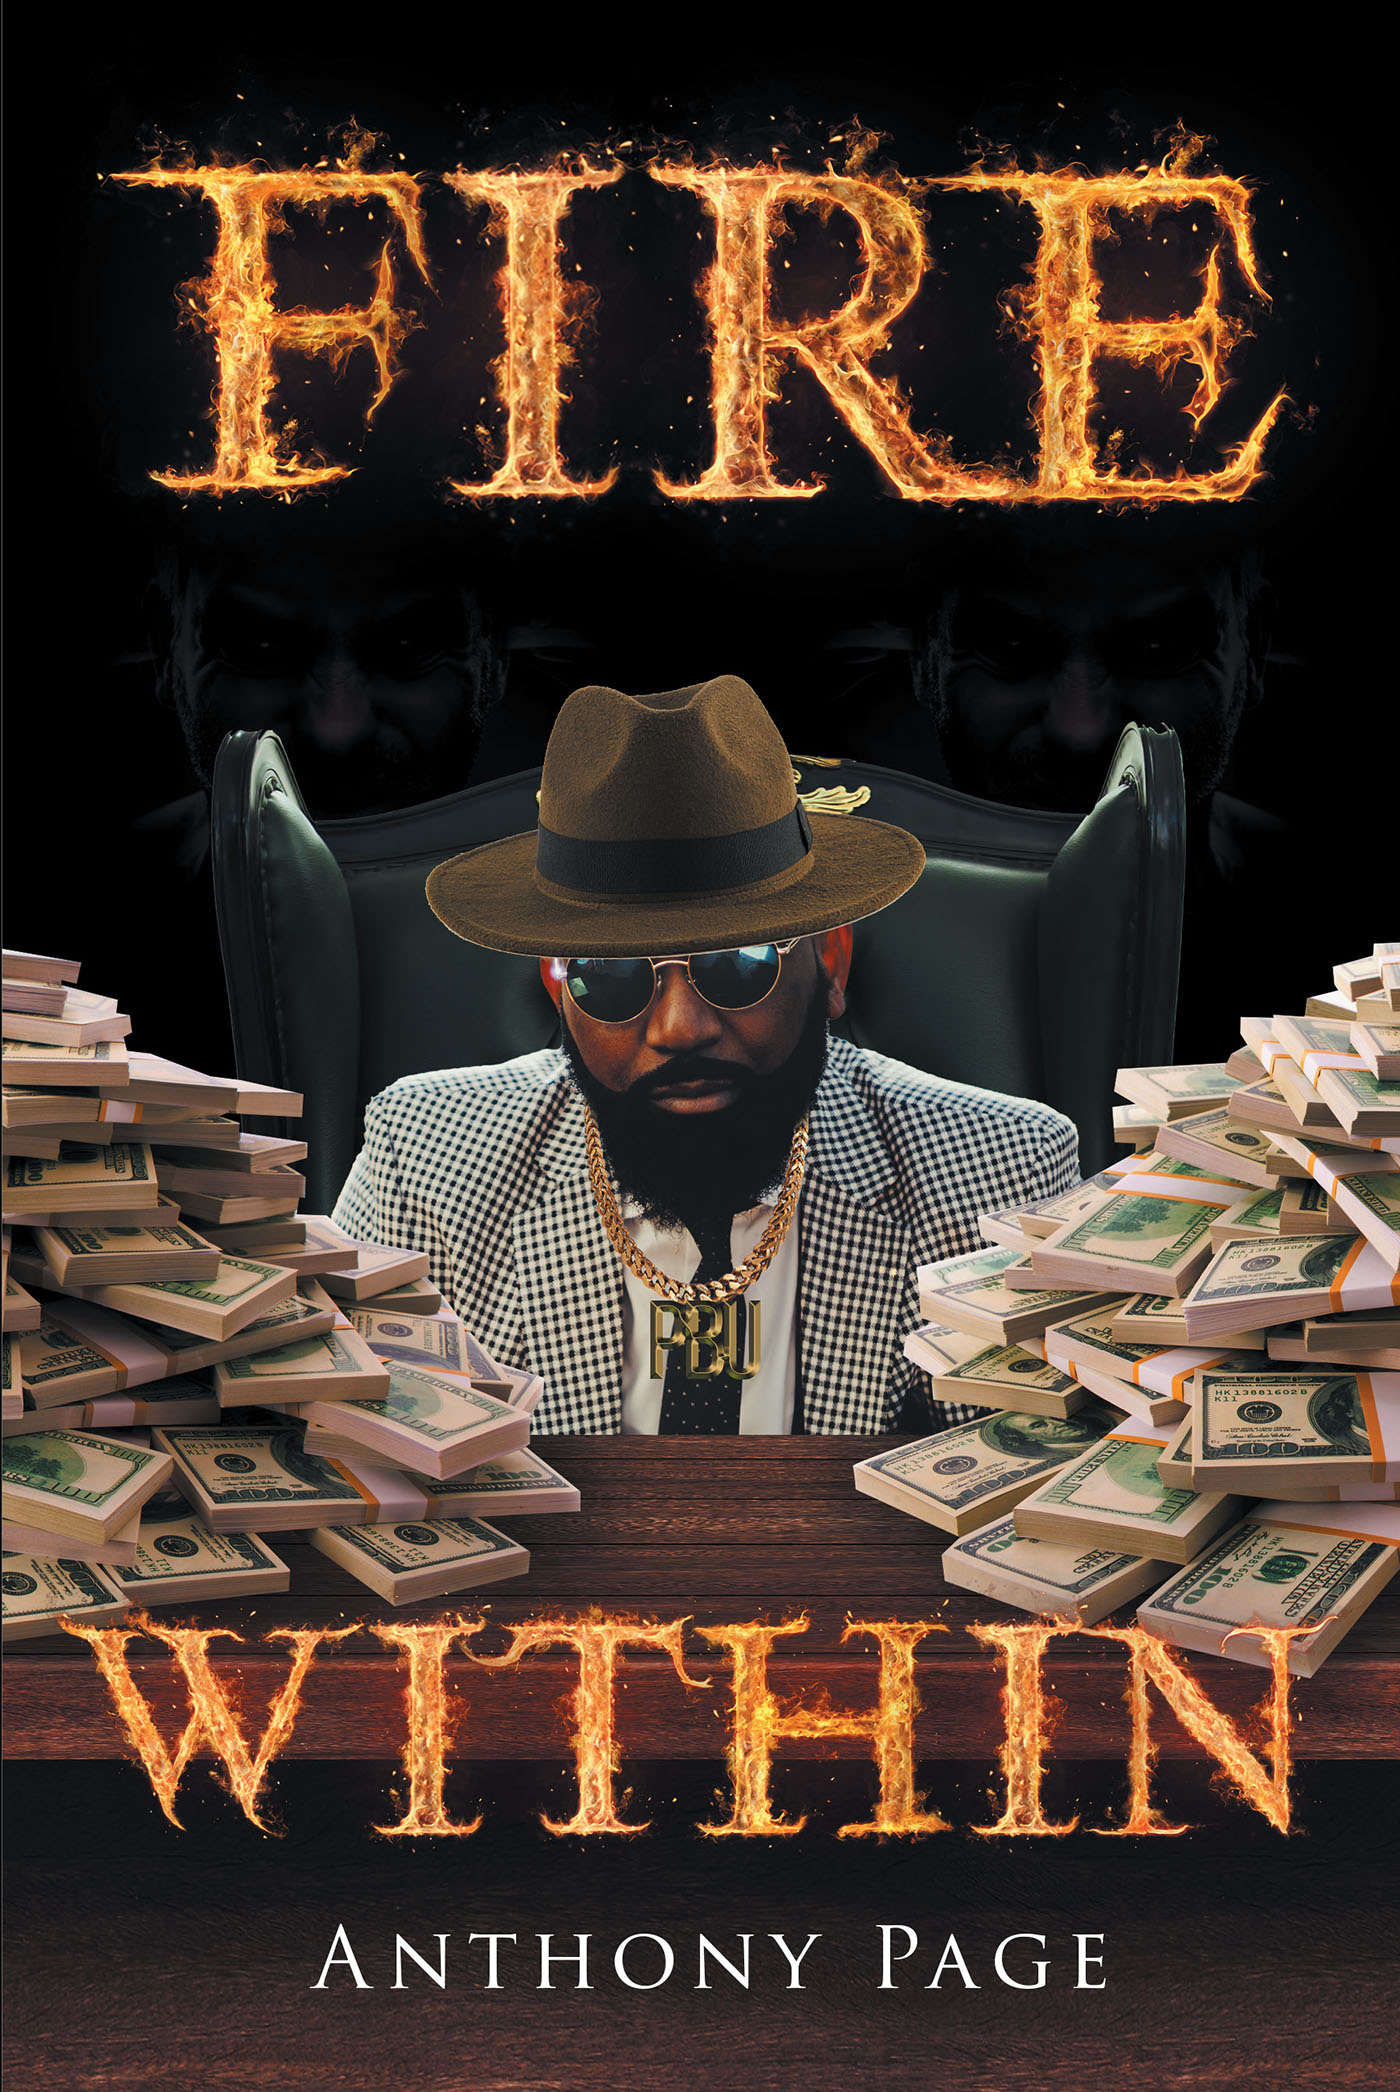 Author Anthony Page’s New Book, "Fire Within," is a Captivating Story of Love, Lies, Murder, and Espionage Set in a Rough Neighborhood Called the Badlands